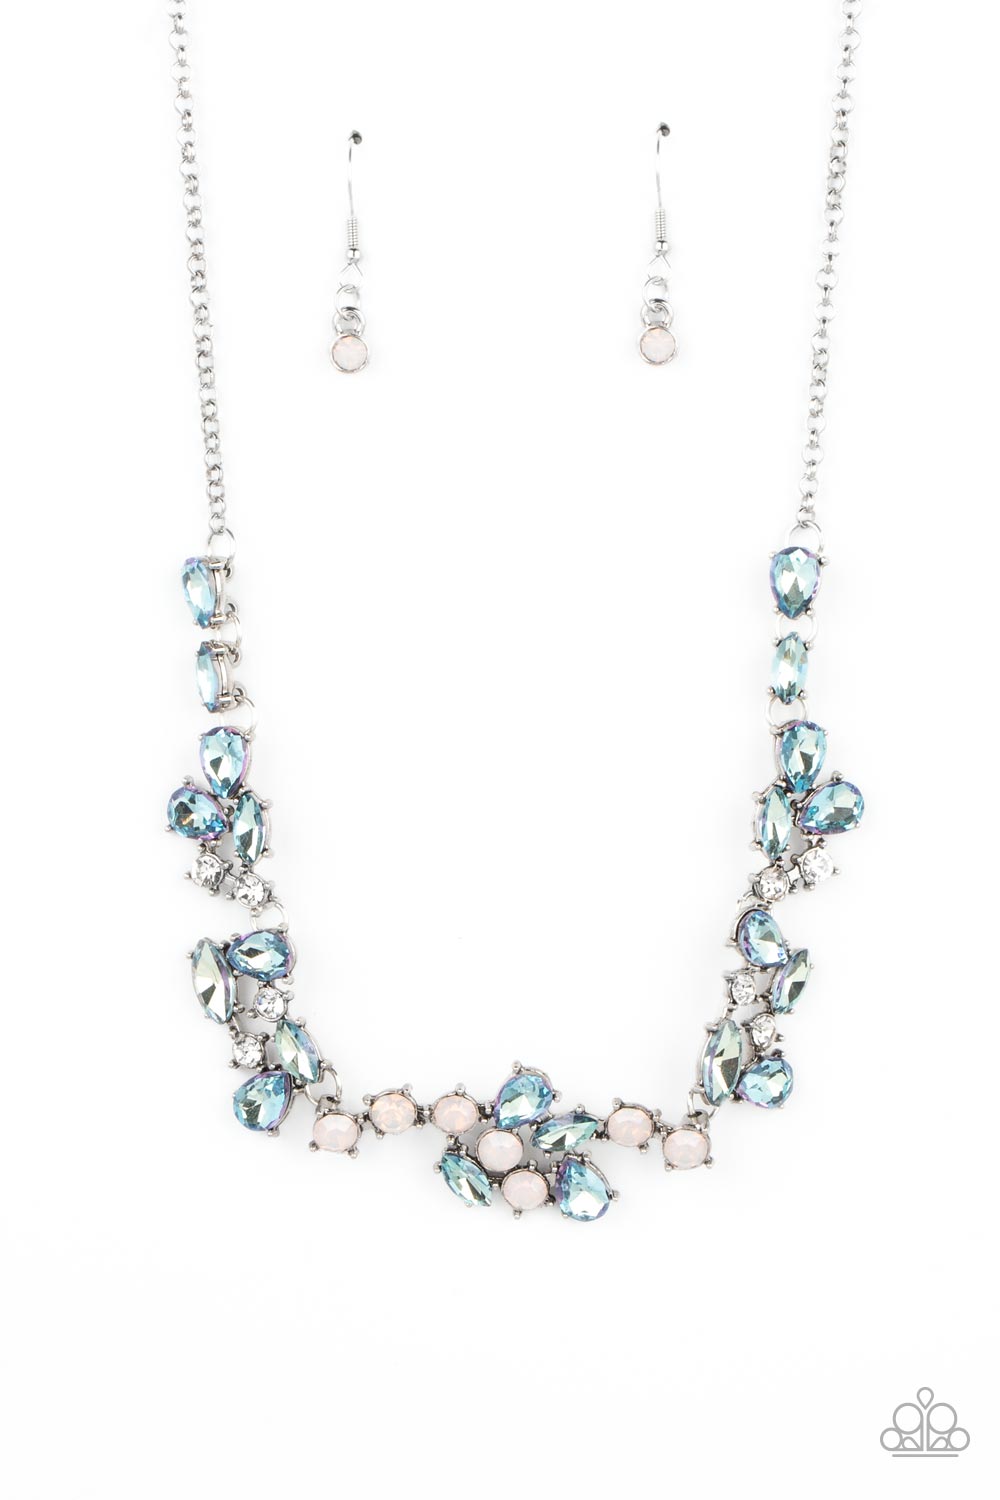 Welcome to the Ice Age - Blue Frosty Gems, White Rhinestones, Opalescent Gem Paparazzi Necklace & matching earrings